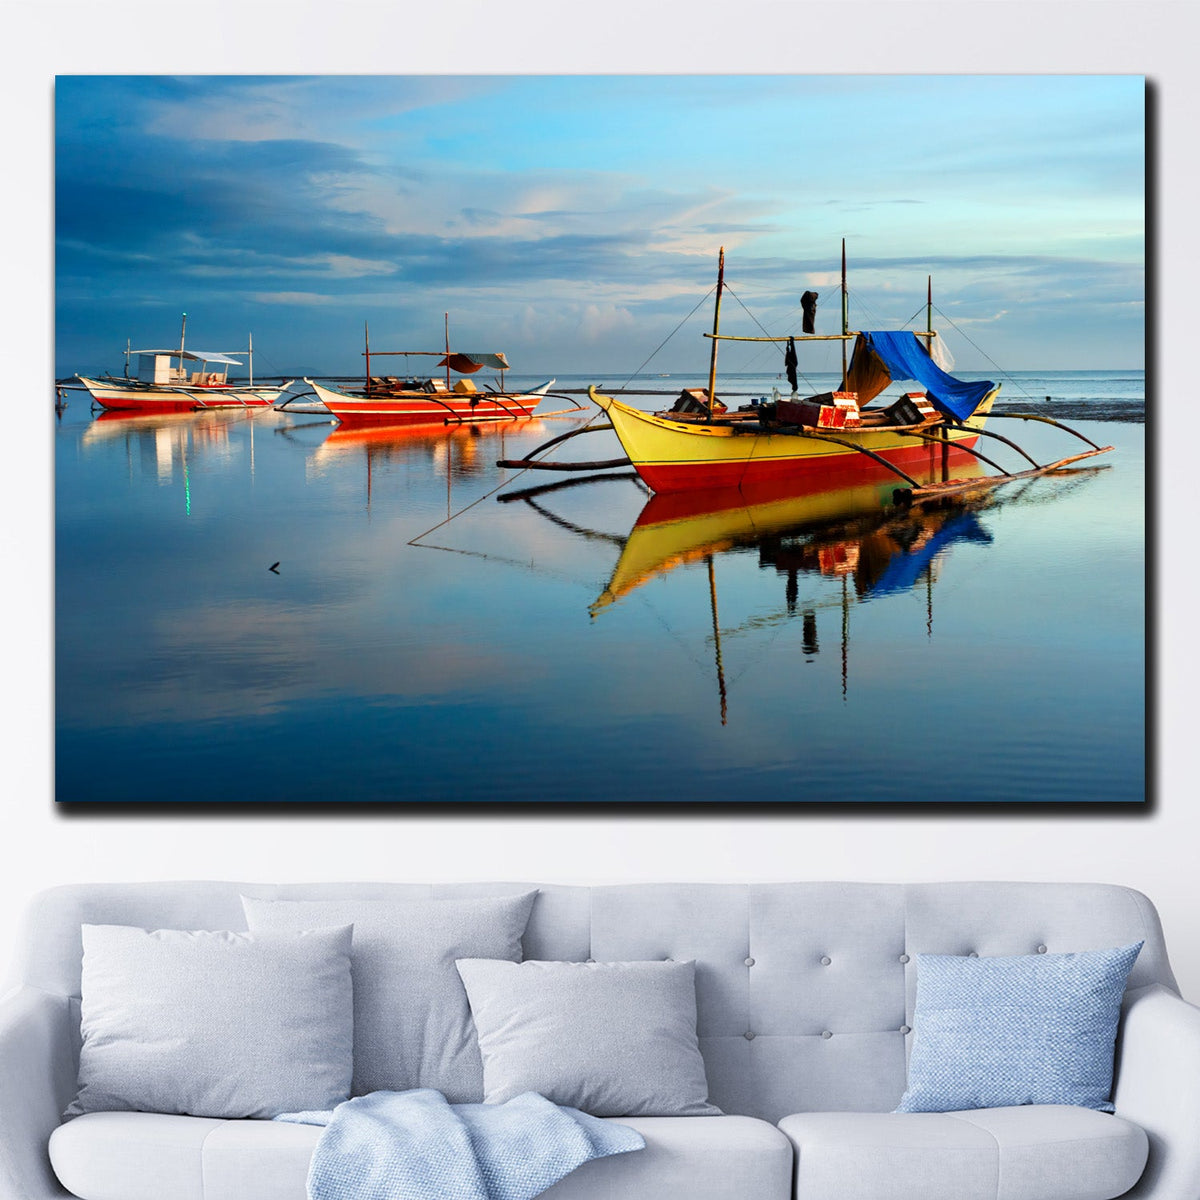 https://cdn.shopify.com/s/files/1/0387/9986/8044/products/BoatsintheWaterCanvasArtprintStretched-1.jpg